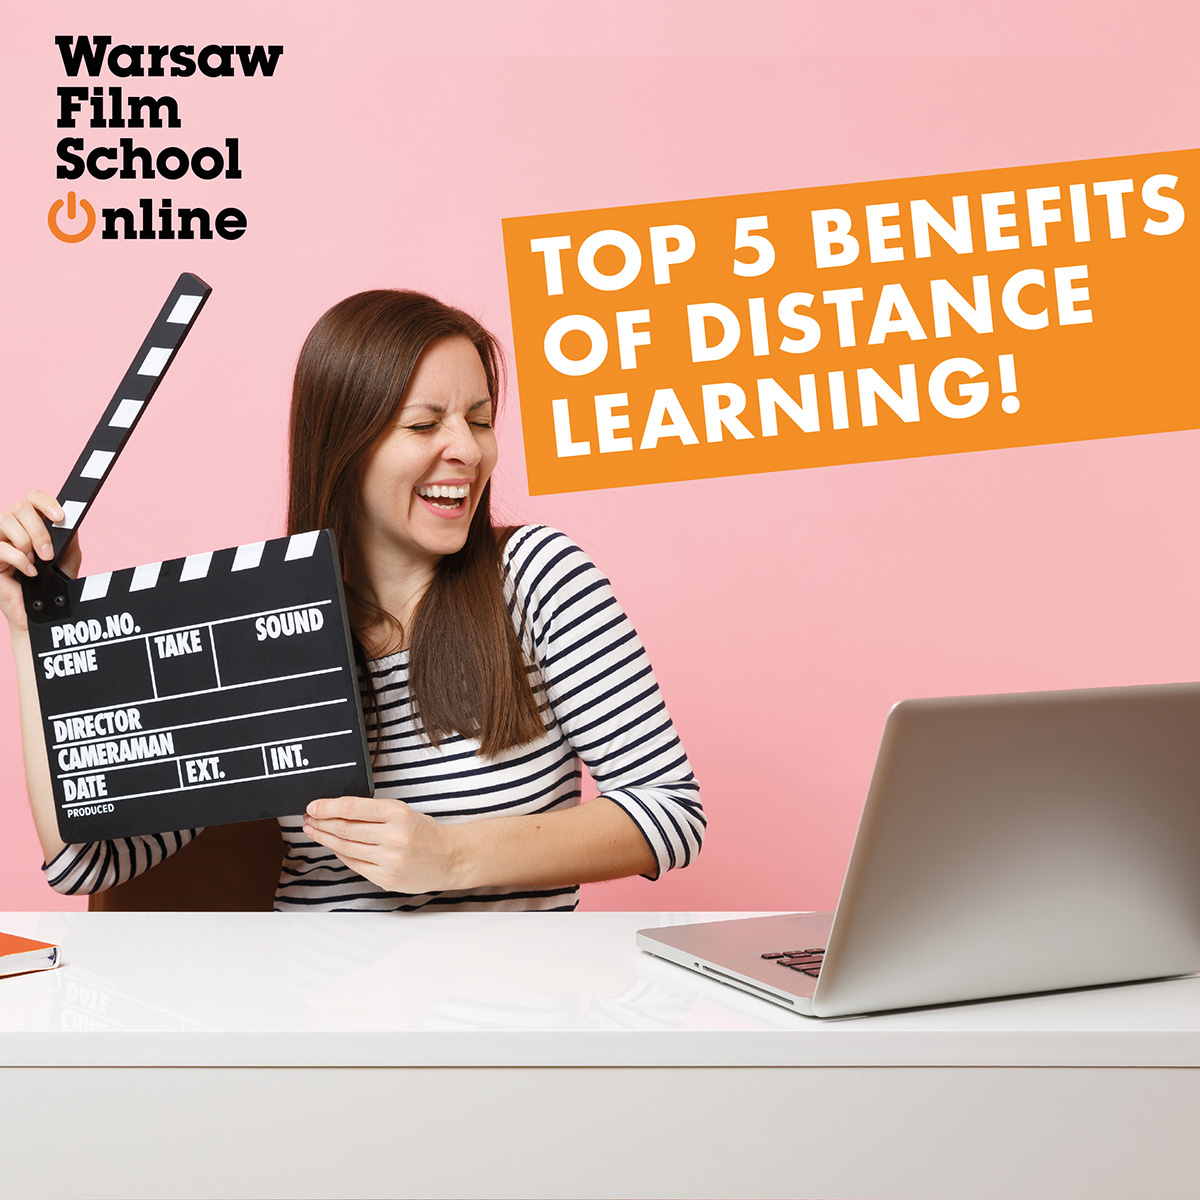 Top 5 benefits of distance learning